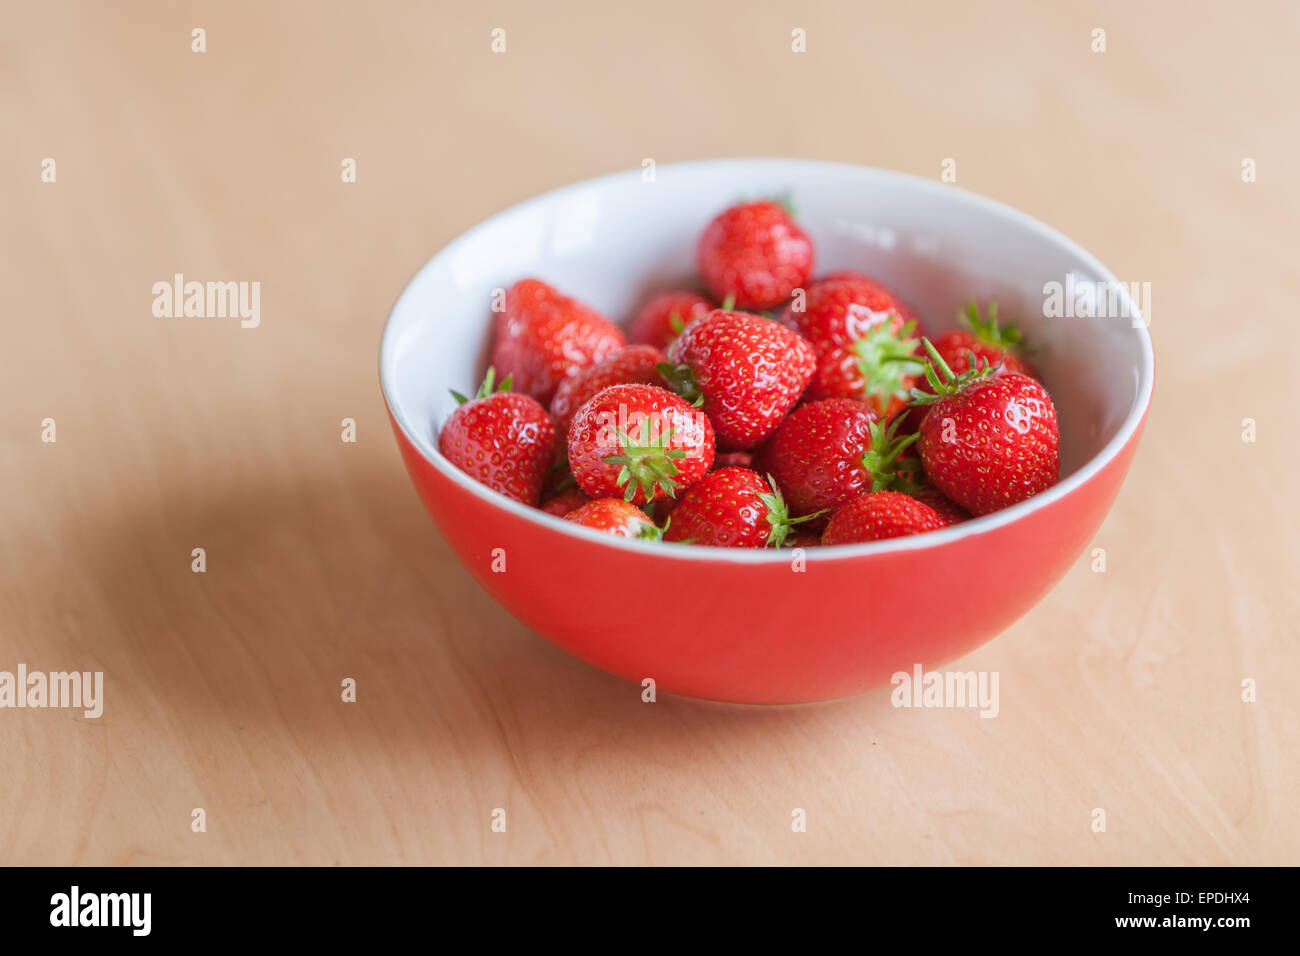 A bowl full of luscious red British Strawberries in the sunlight, healthy summer food and lifestyle Stock Photo